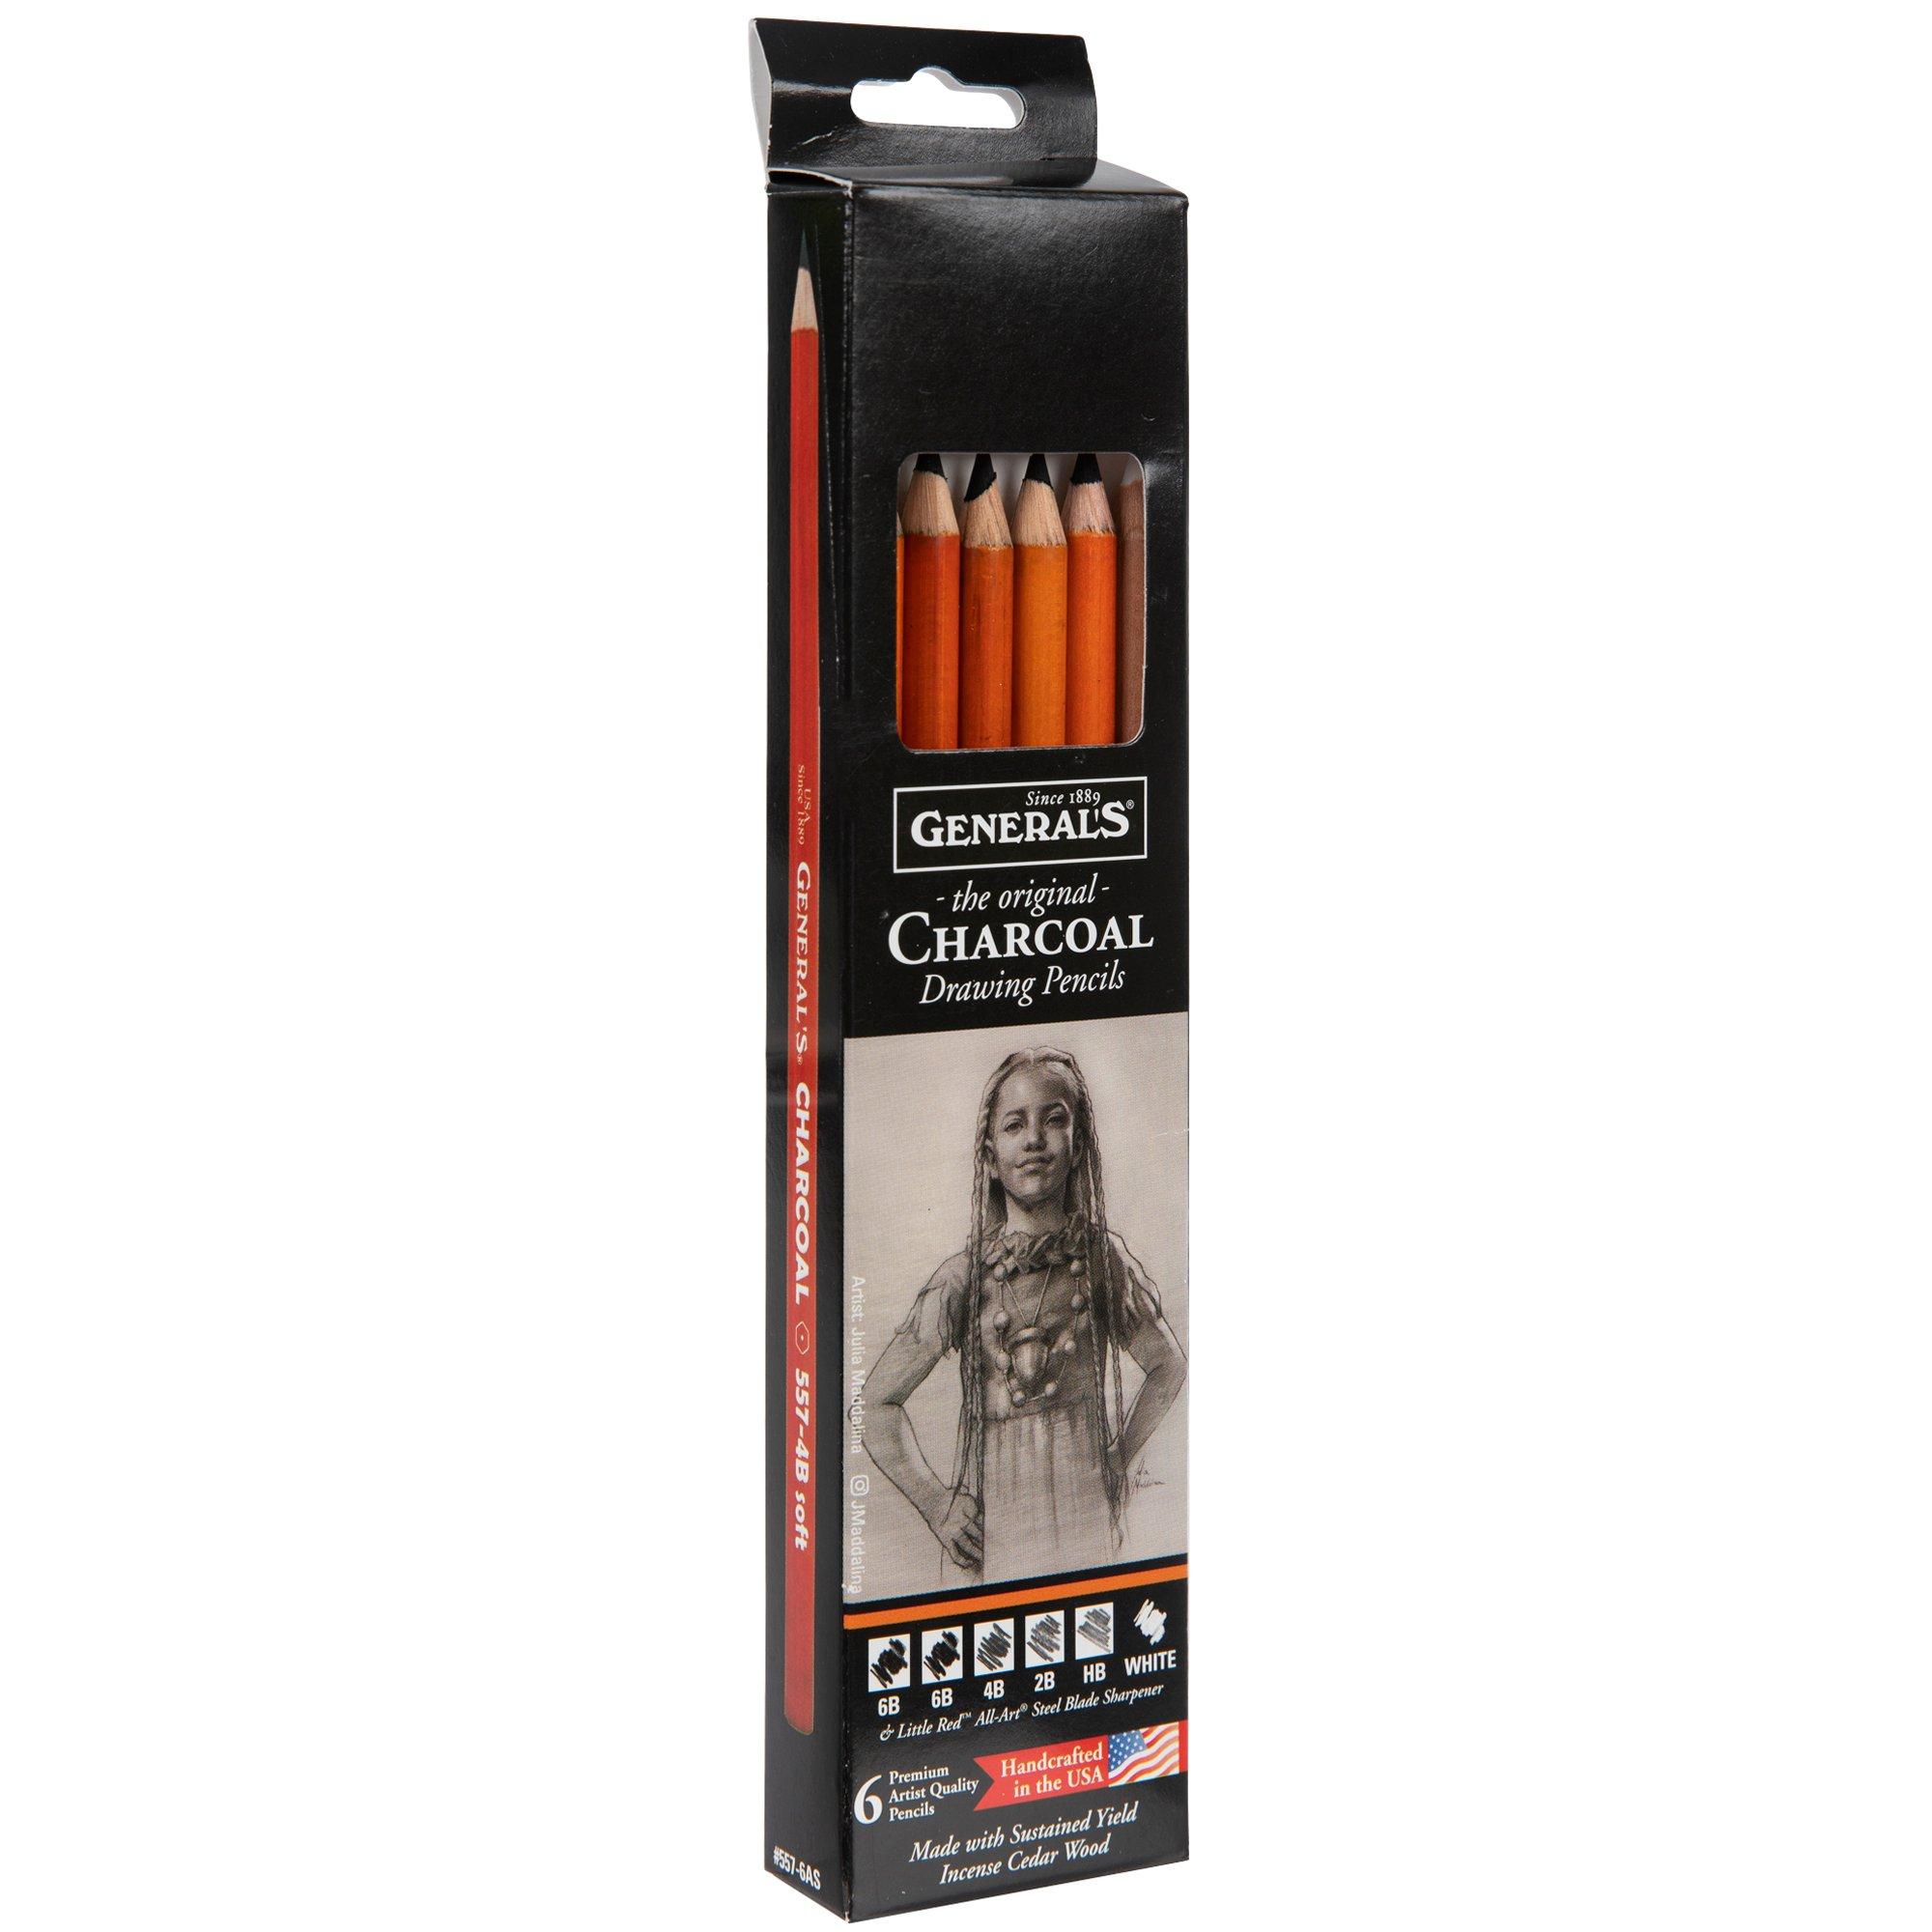  General's Charcoal Drawing Pencils